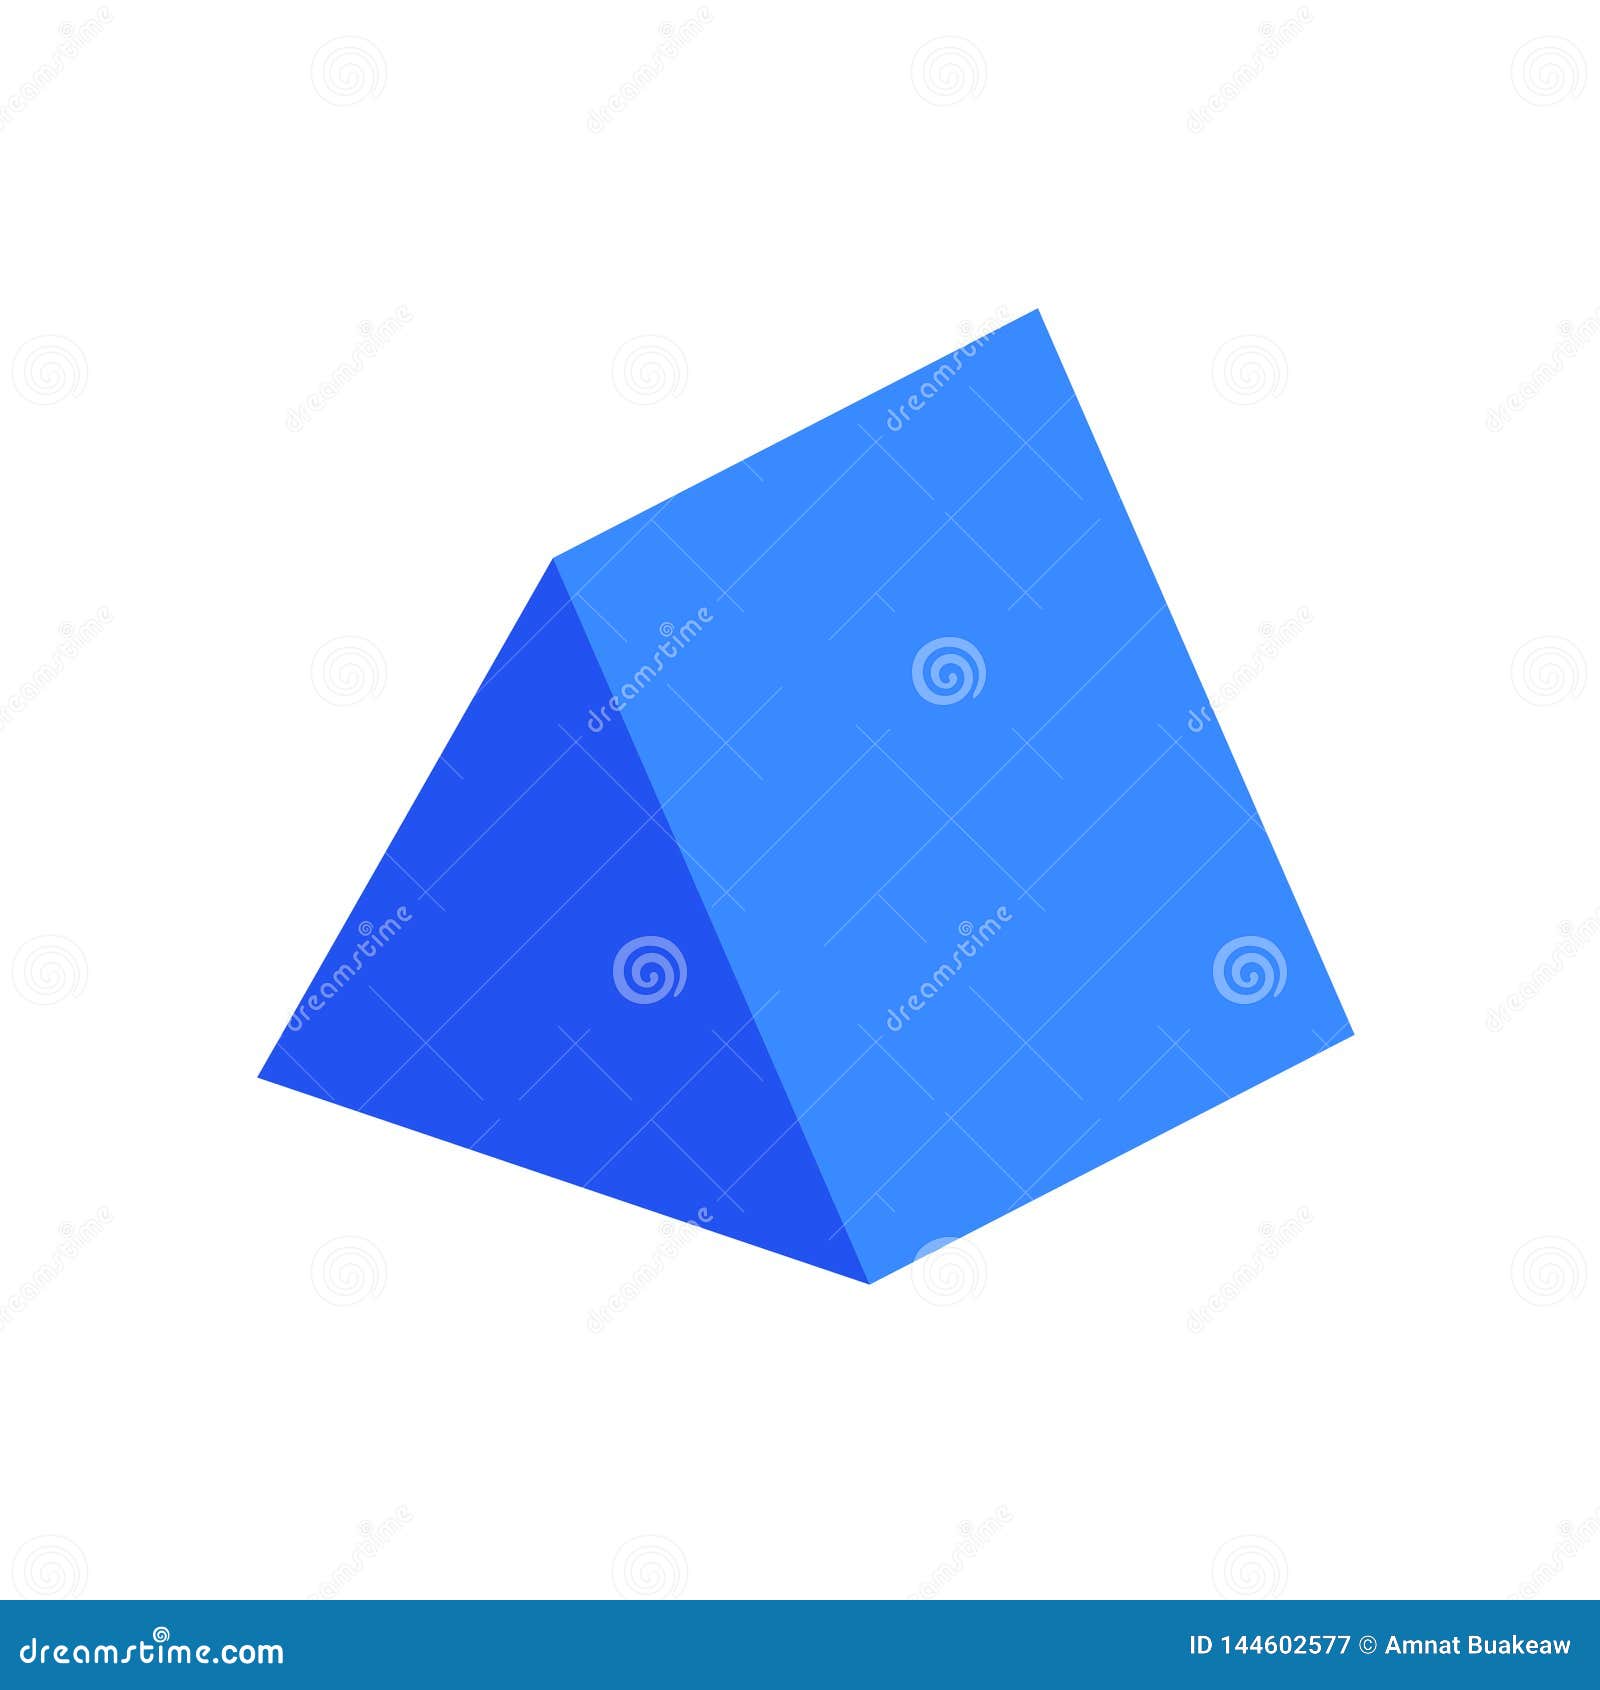 Blue Triangular Prism Basic Simple 3d Shape Isolated on White Background,  Geometric Triangular Prism Icon, 3d Shape Symbol Stock Vector -  Illustration of icosahedron, collection: 144602577